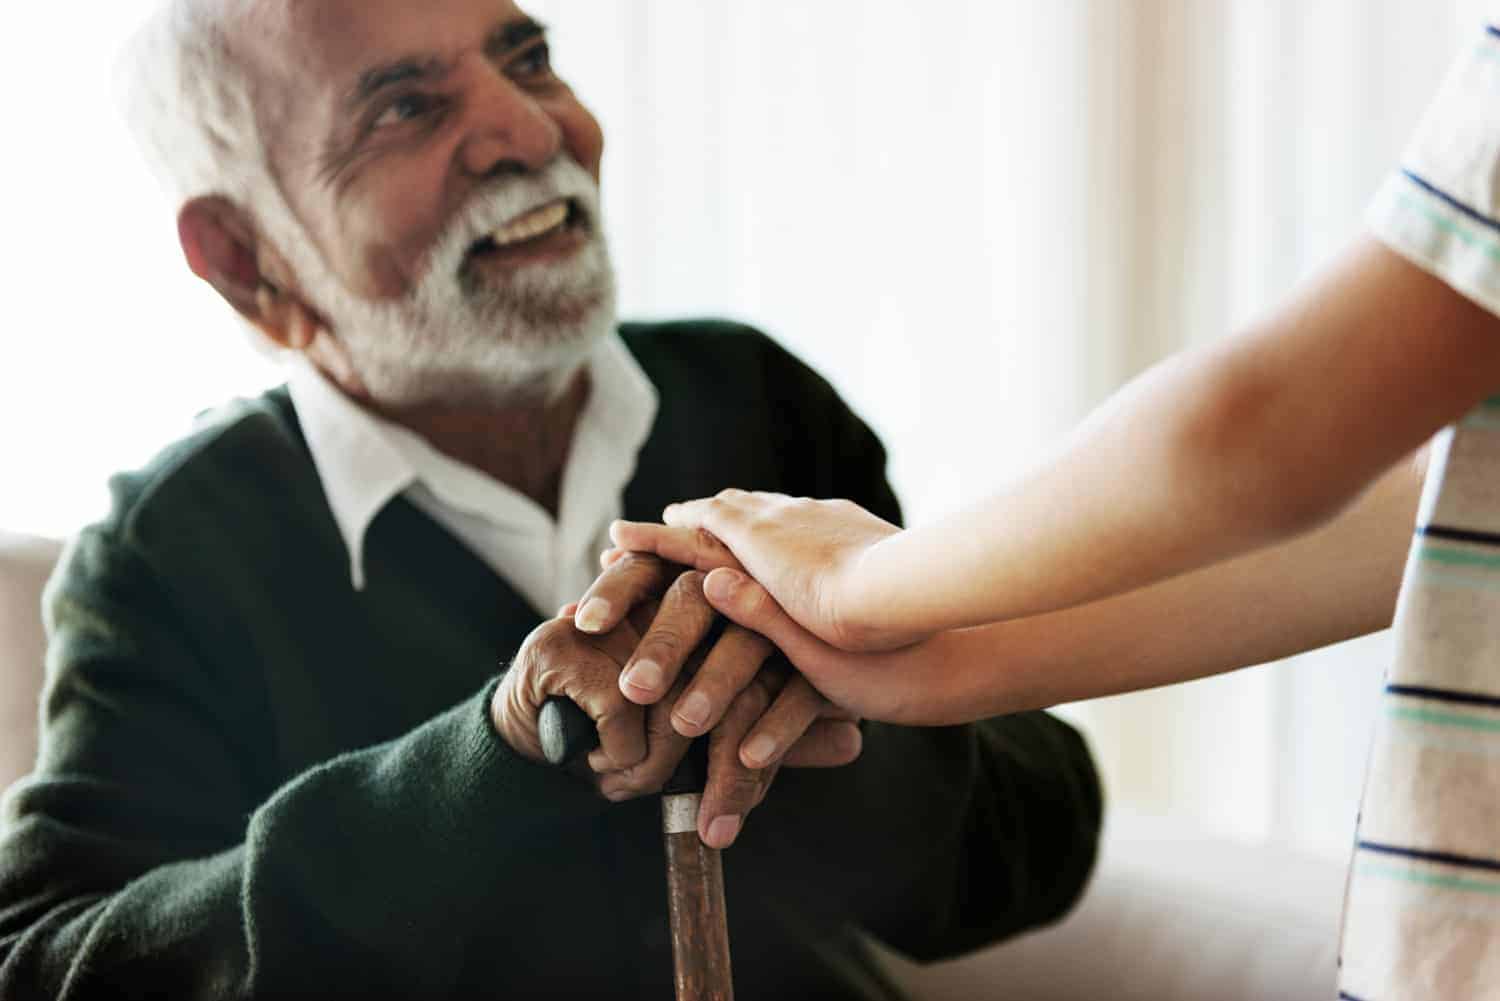 A heartwarming exchange: an elderly man with a cane smiles joyfully as he holds hands with a younger person, emphasizing a tender moment of connection and support.